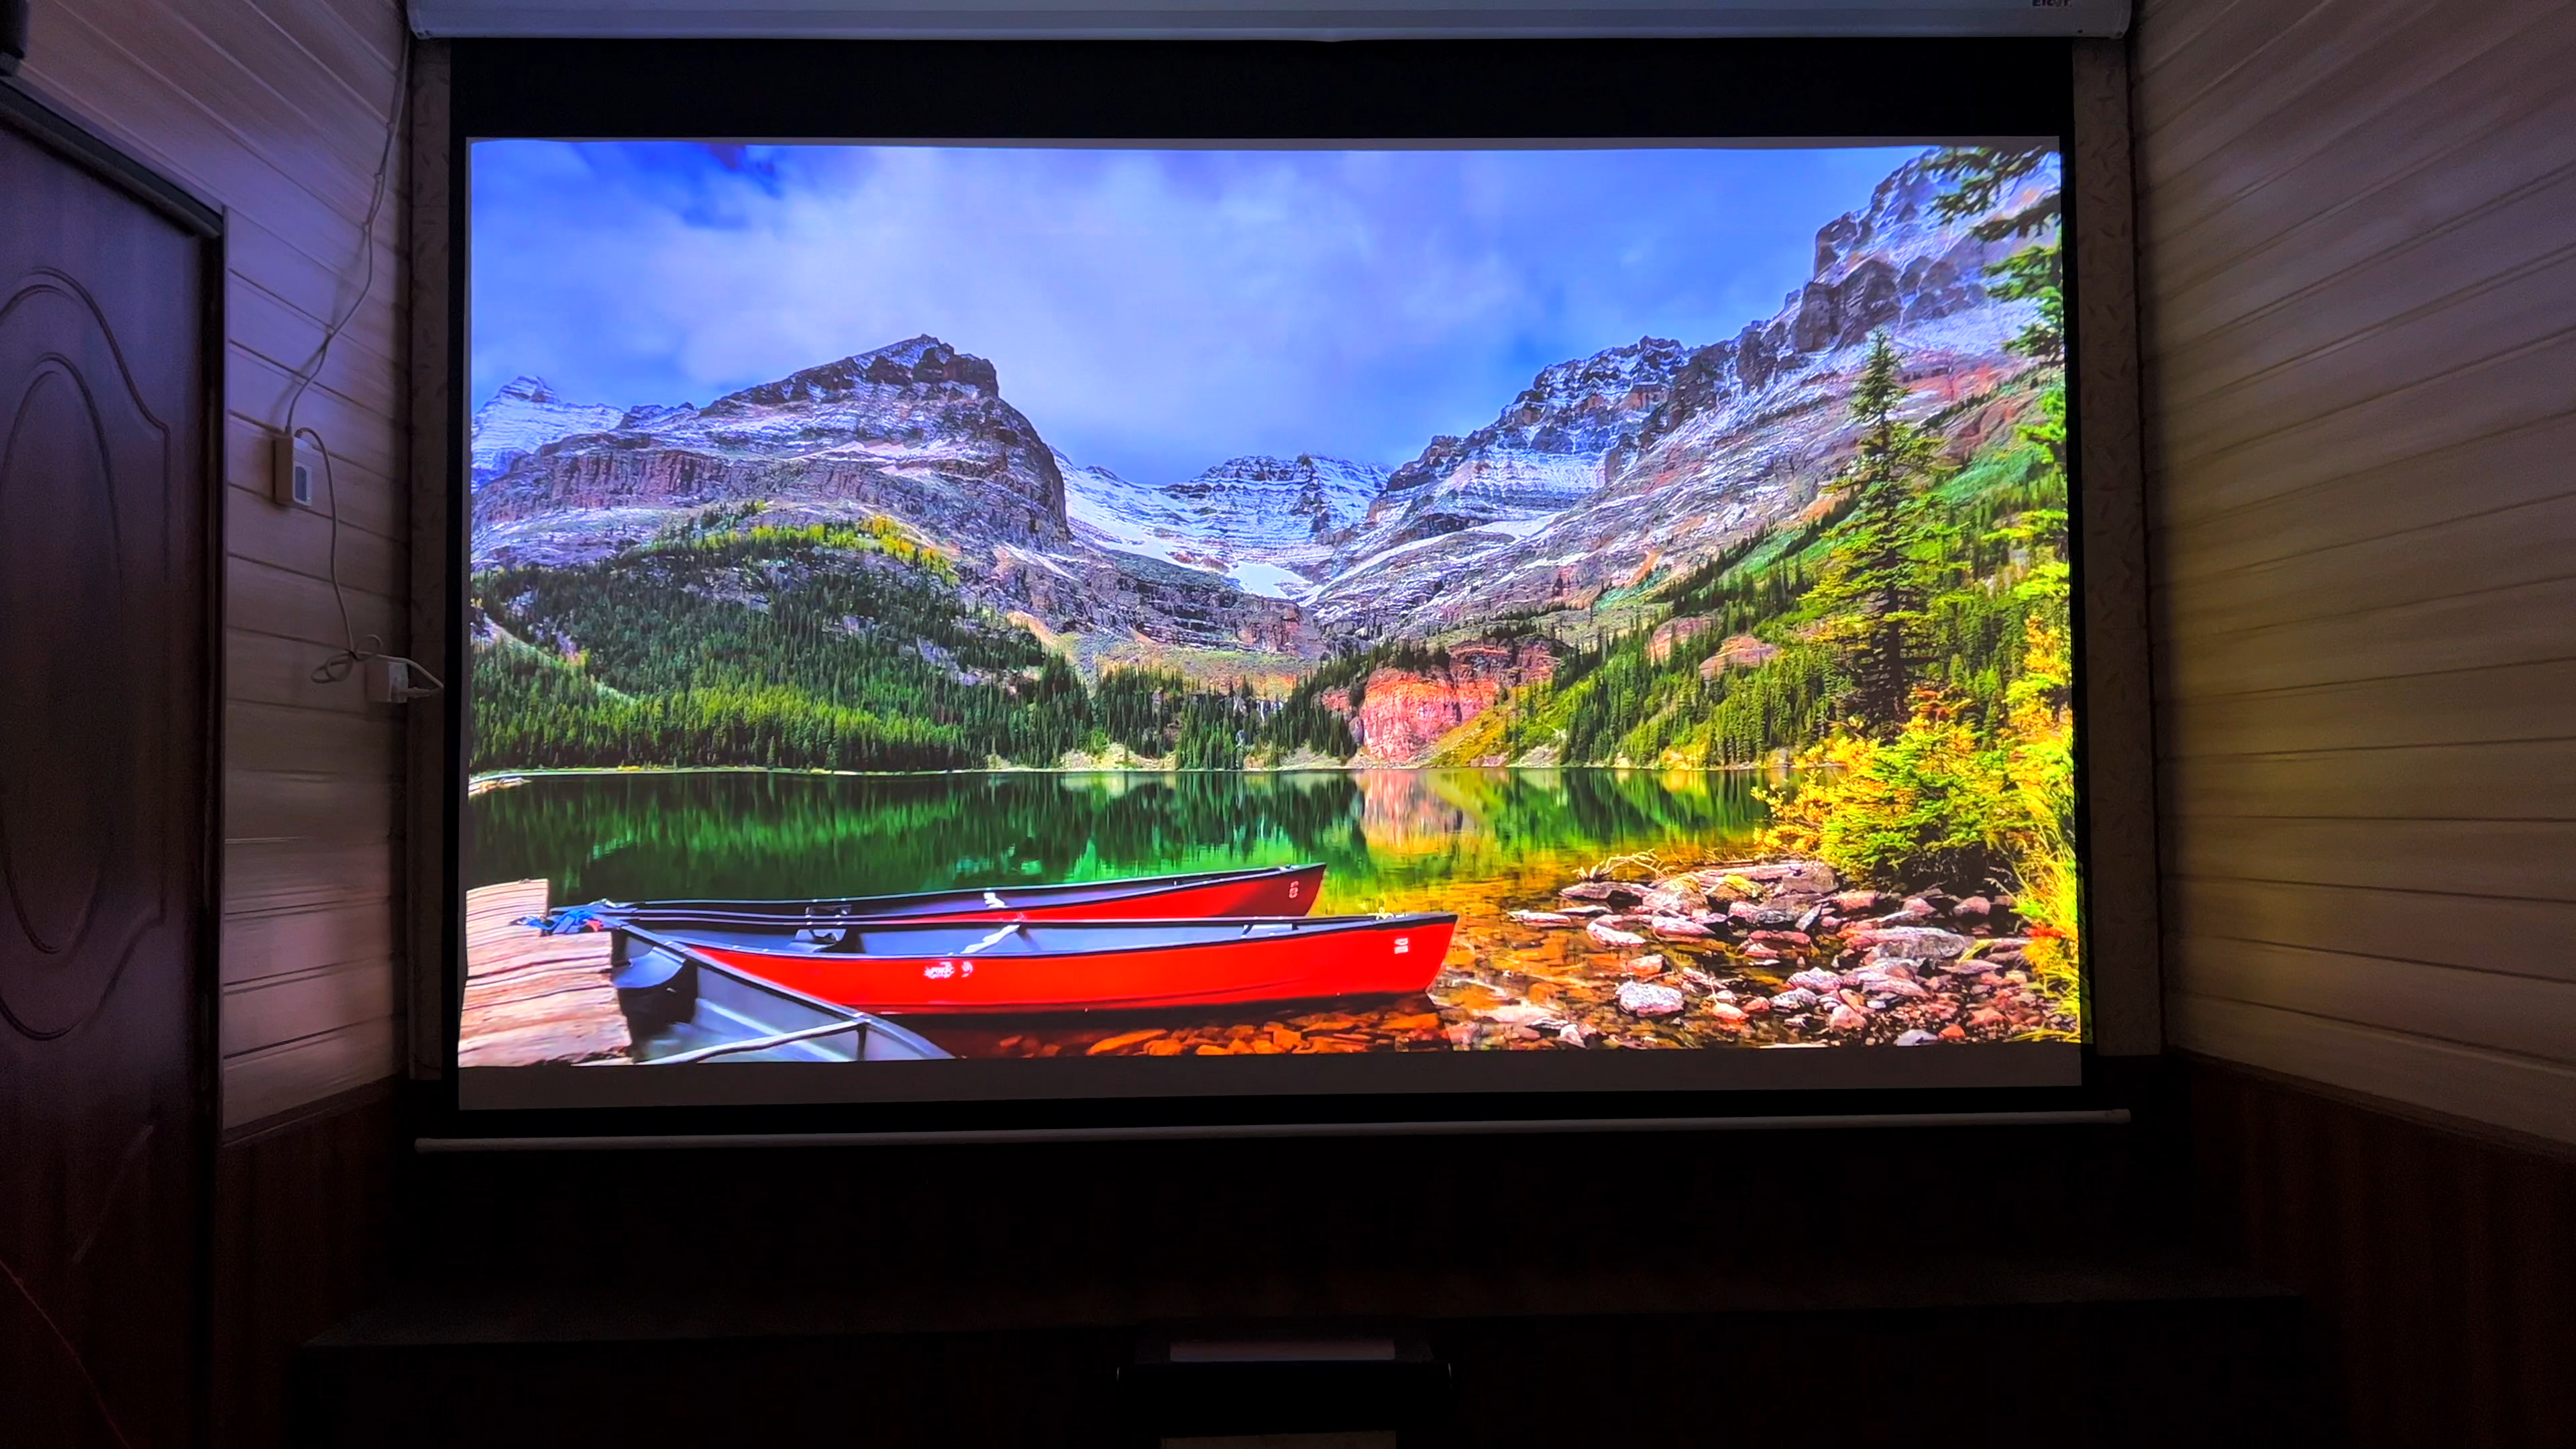 4K Laser Projector Picture Quality Review